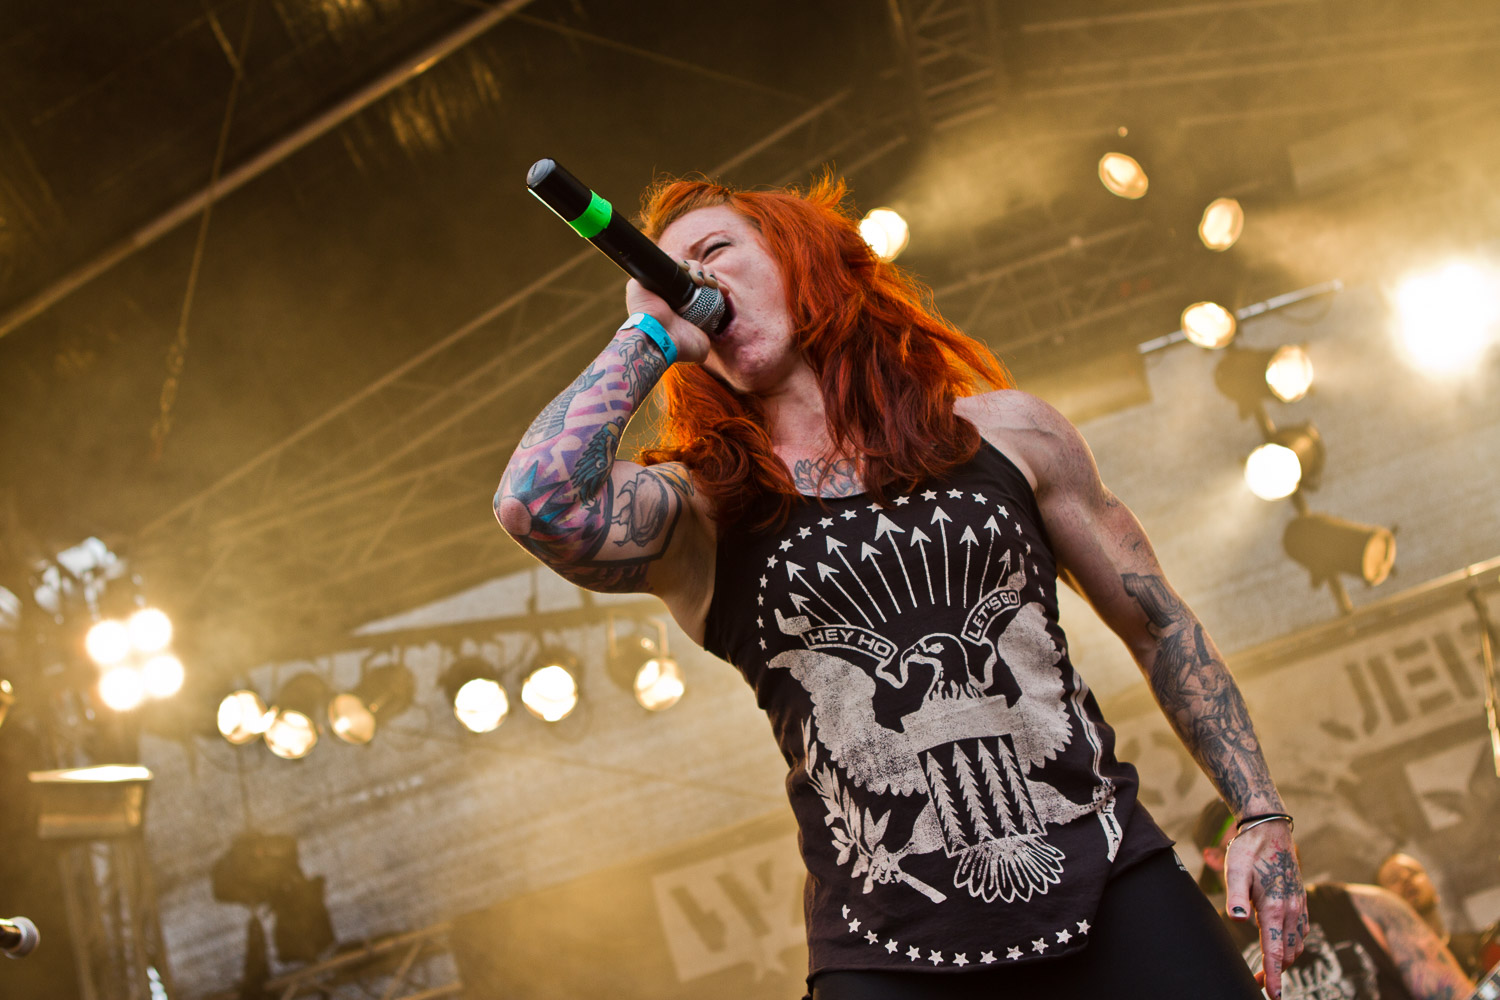 Walls Of Jericho - Live @ Mair1 Open Air Festival 2014. 